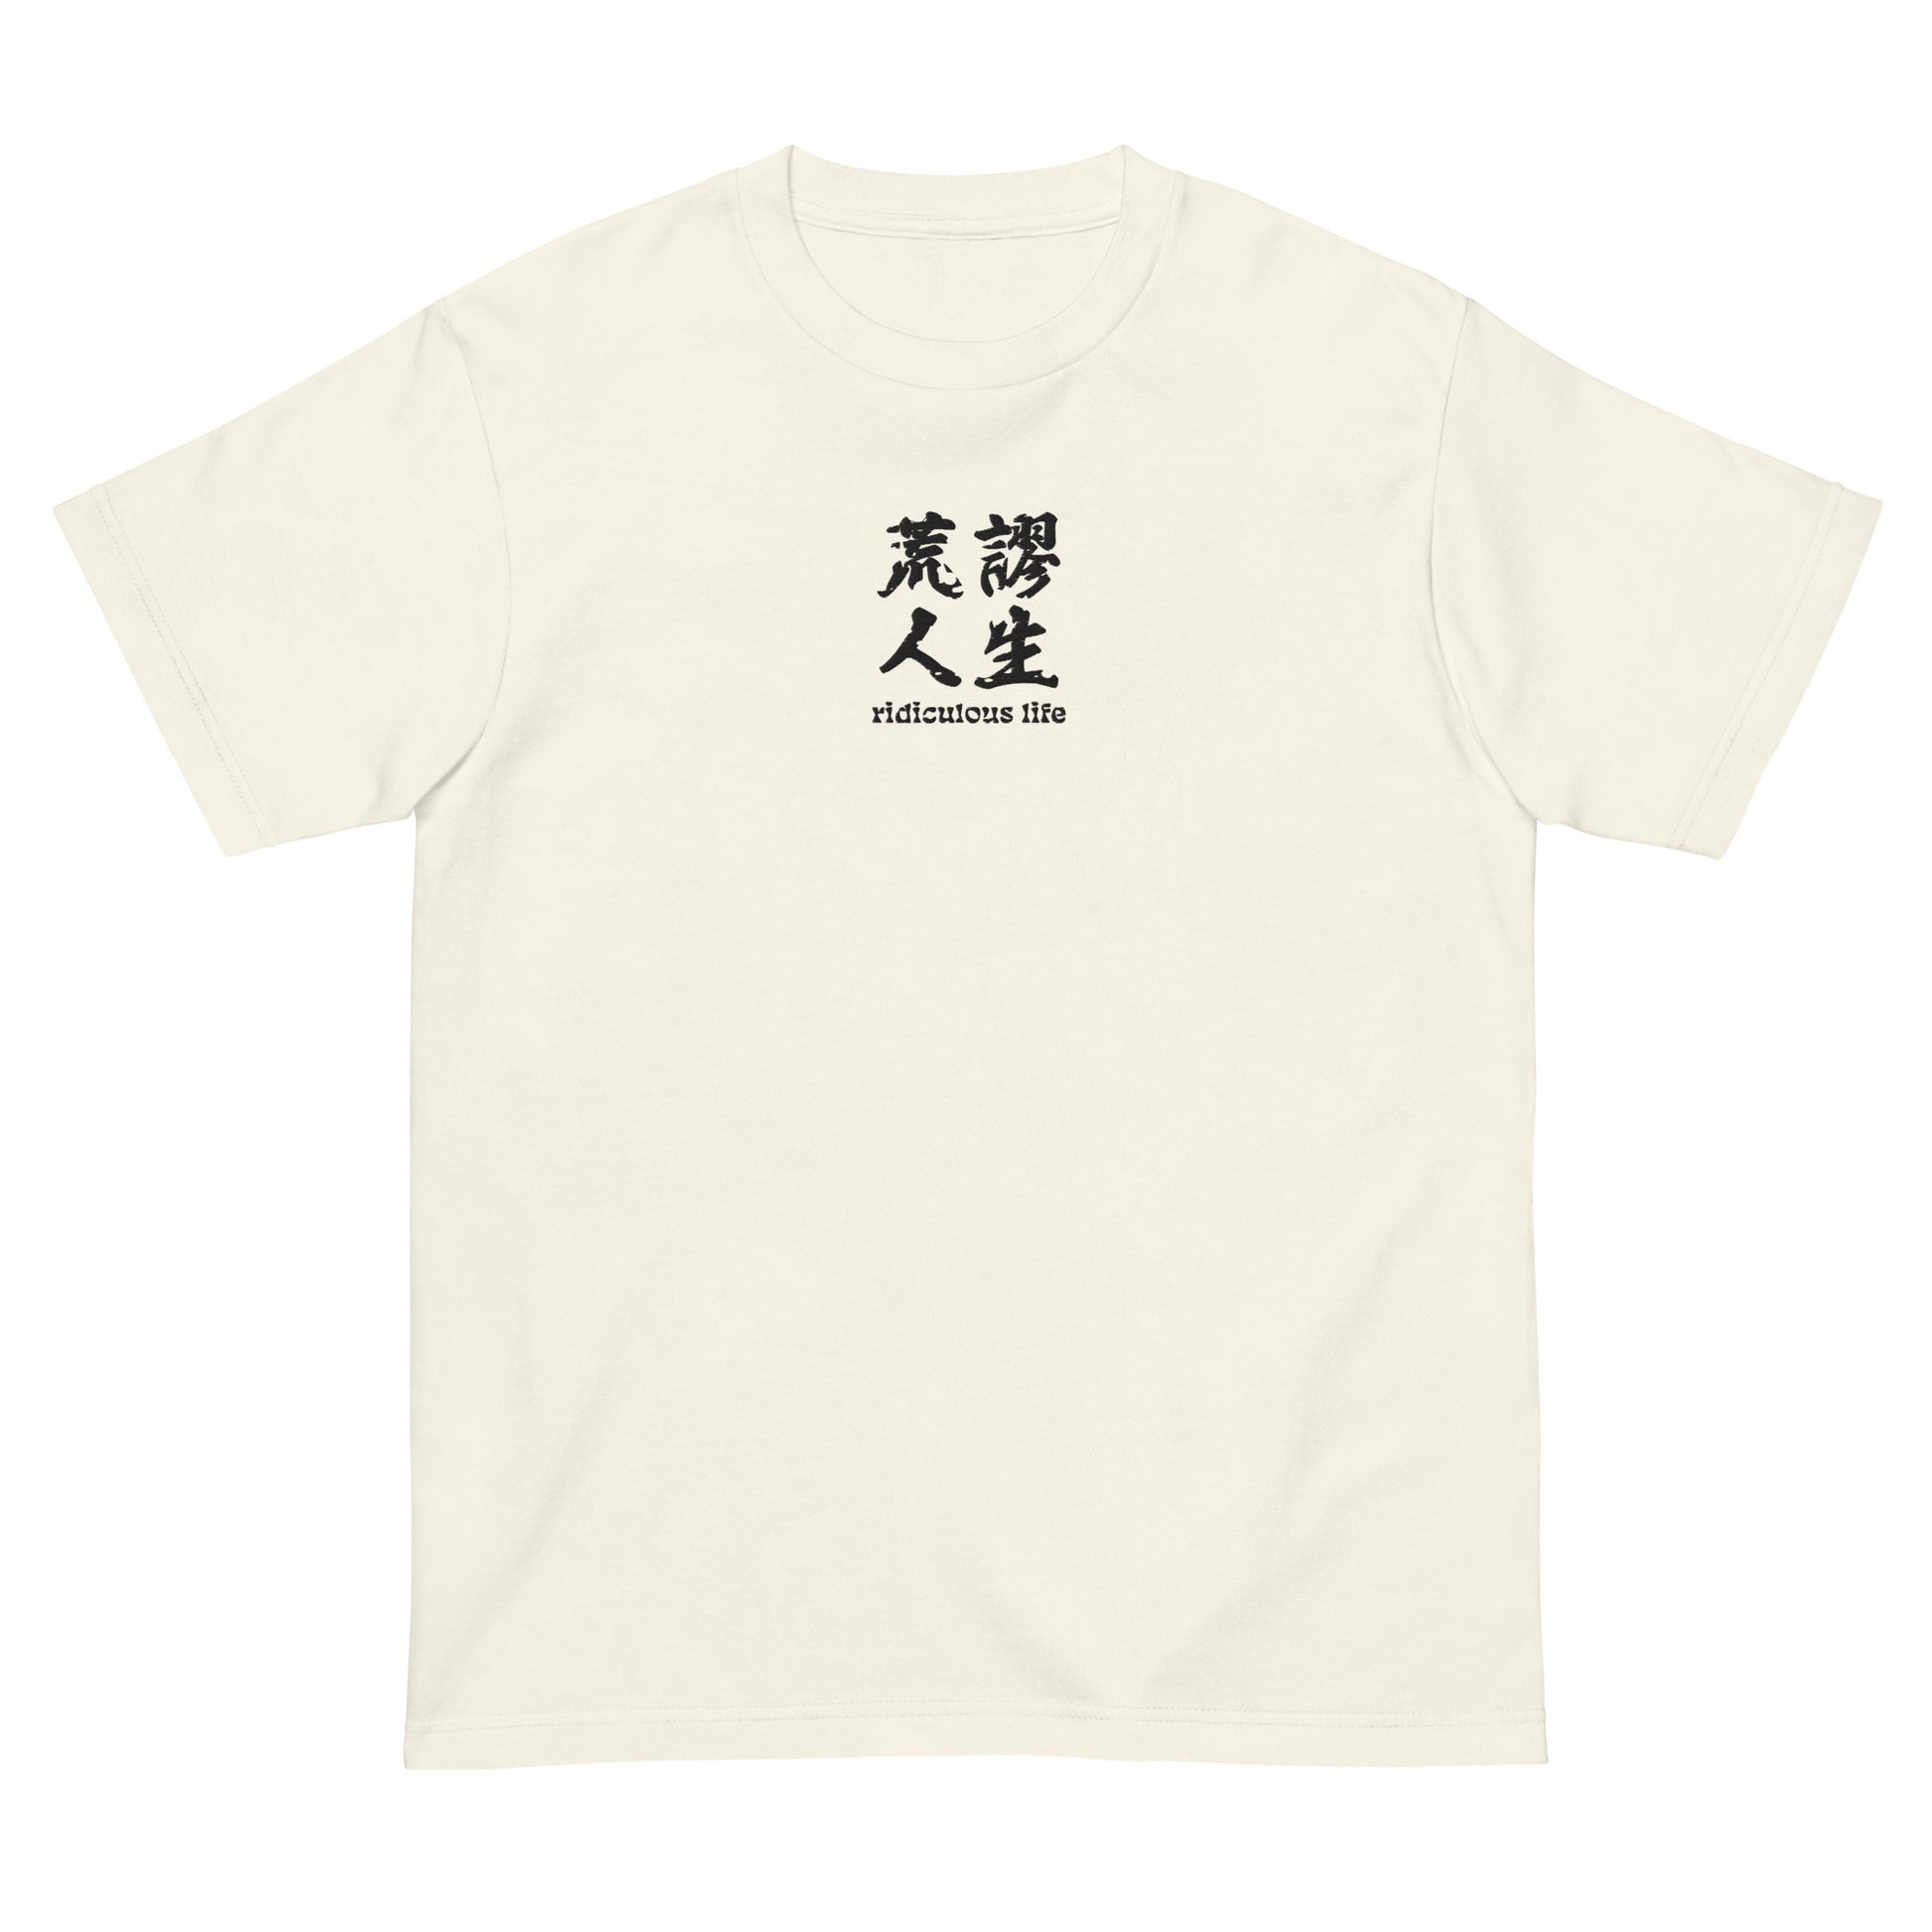 Ivory High Quality Tee - Front Design with an Black Embroidery "Ridiculous Life" in Chinese and English